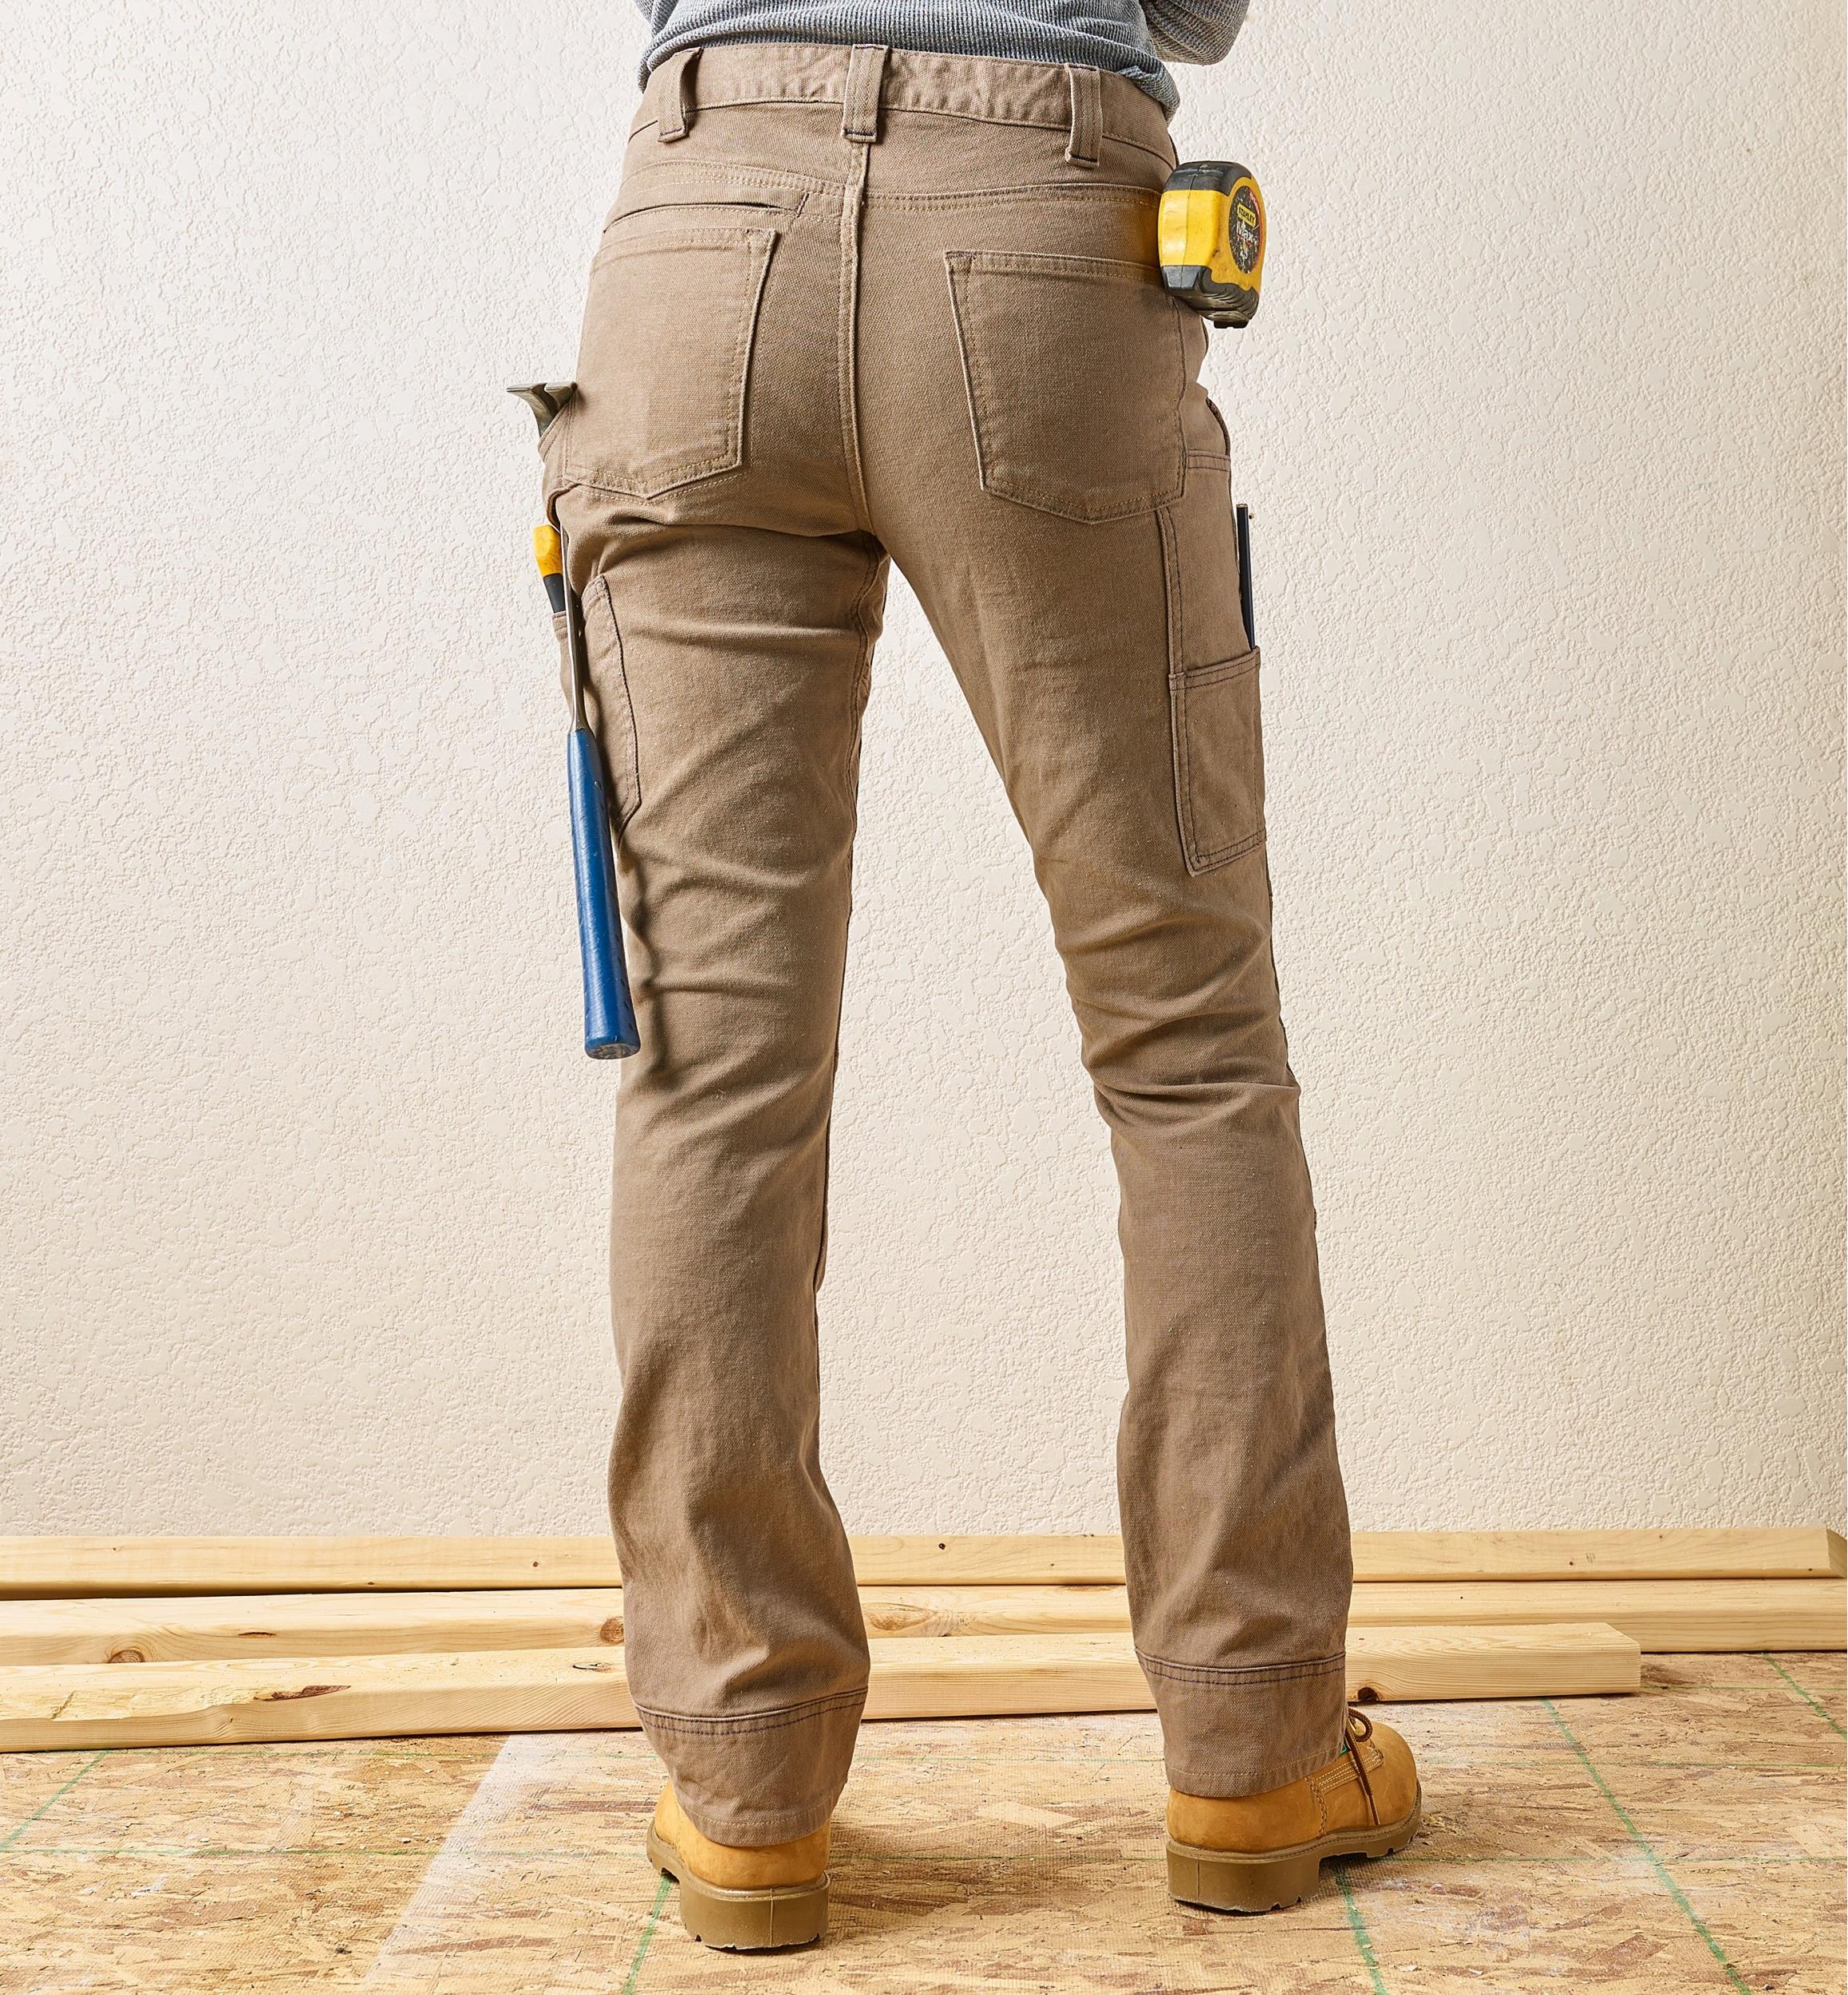 Dovetail Womens Work Pants  Lee Valley Tools